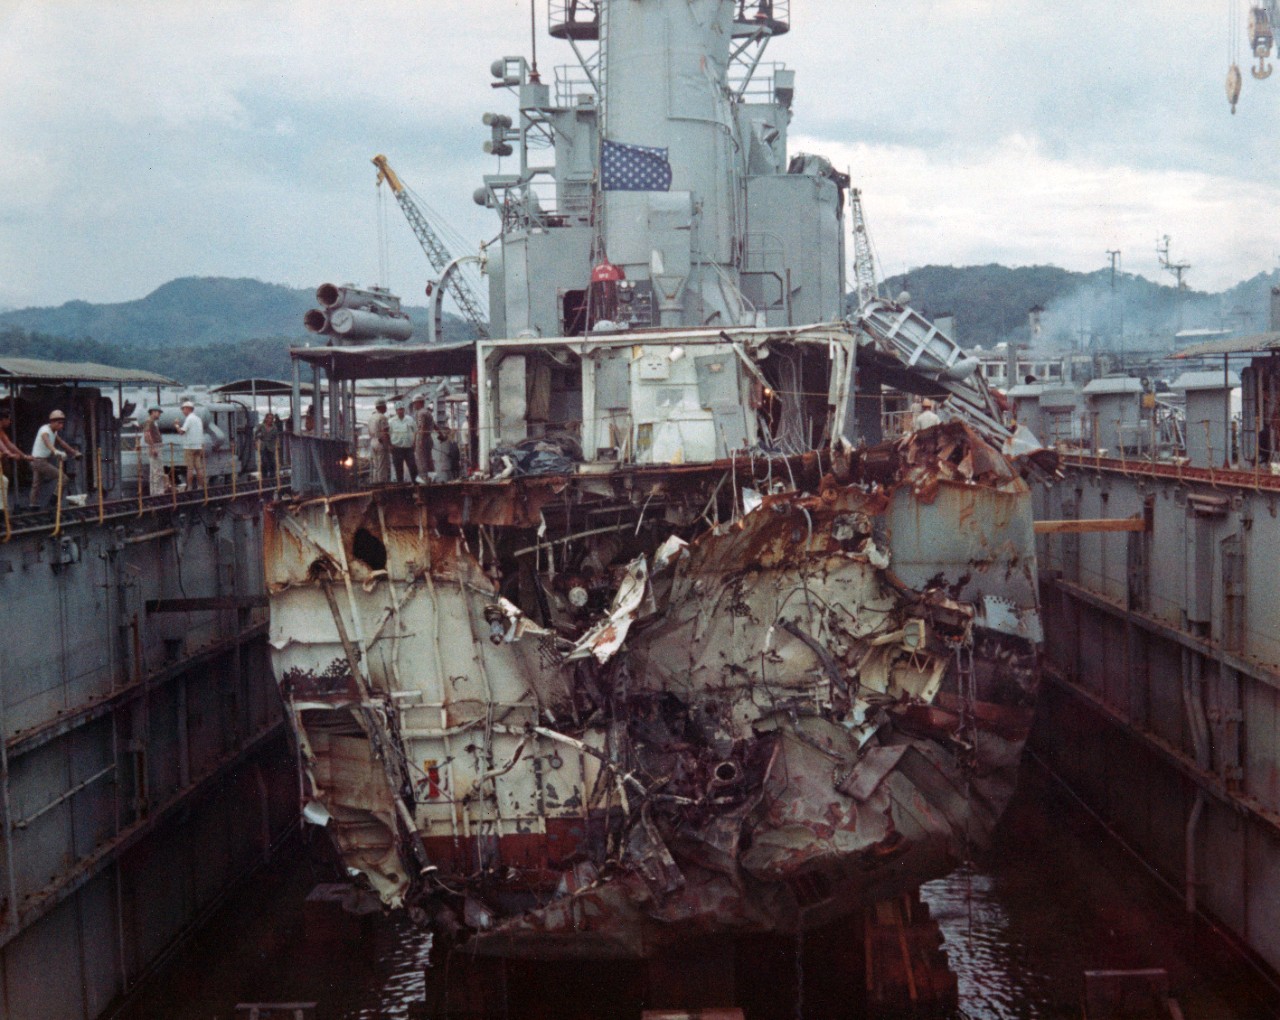 44 color negatives and 7 color prints showing the damaged USS Frank E. Evans (DD-754) being escorted to the auxiliary repair drydock USS Windsor (ADR-22) at Subic Bay, after it had been in involved in a collision with the Australian aircraft carrier HMAS Melbourne on 3 June 1969. Photographer PN2 Ralph Treser. Photos received from PAO CINCPAC Det-WESPAC, 26 April 1971.